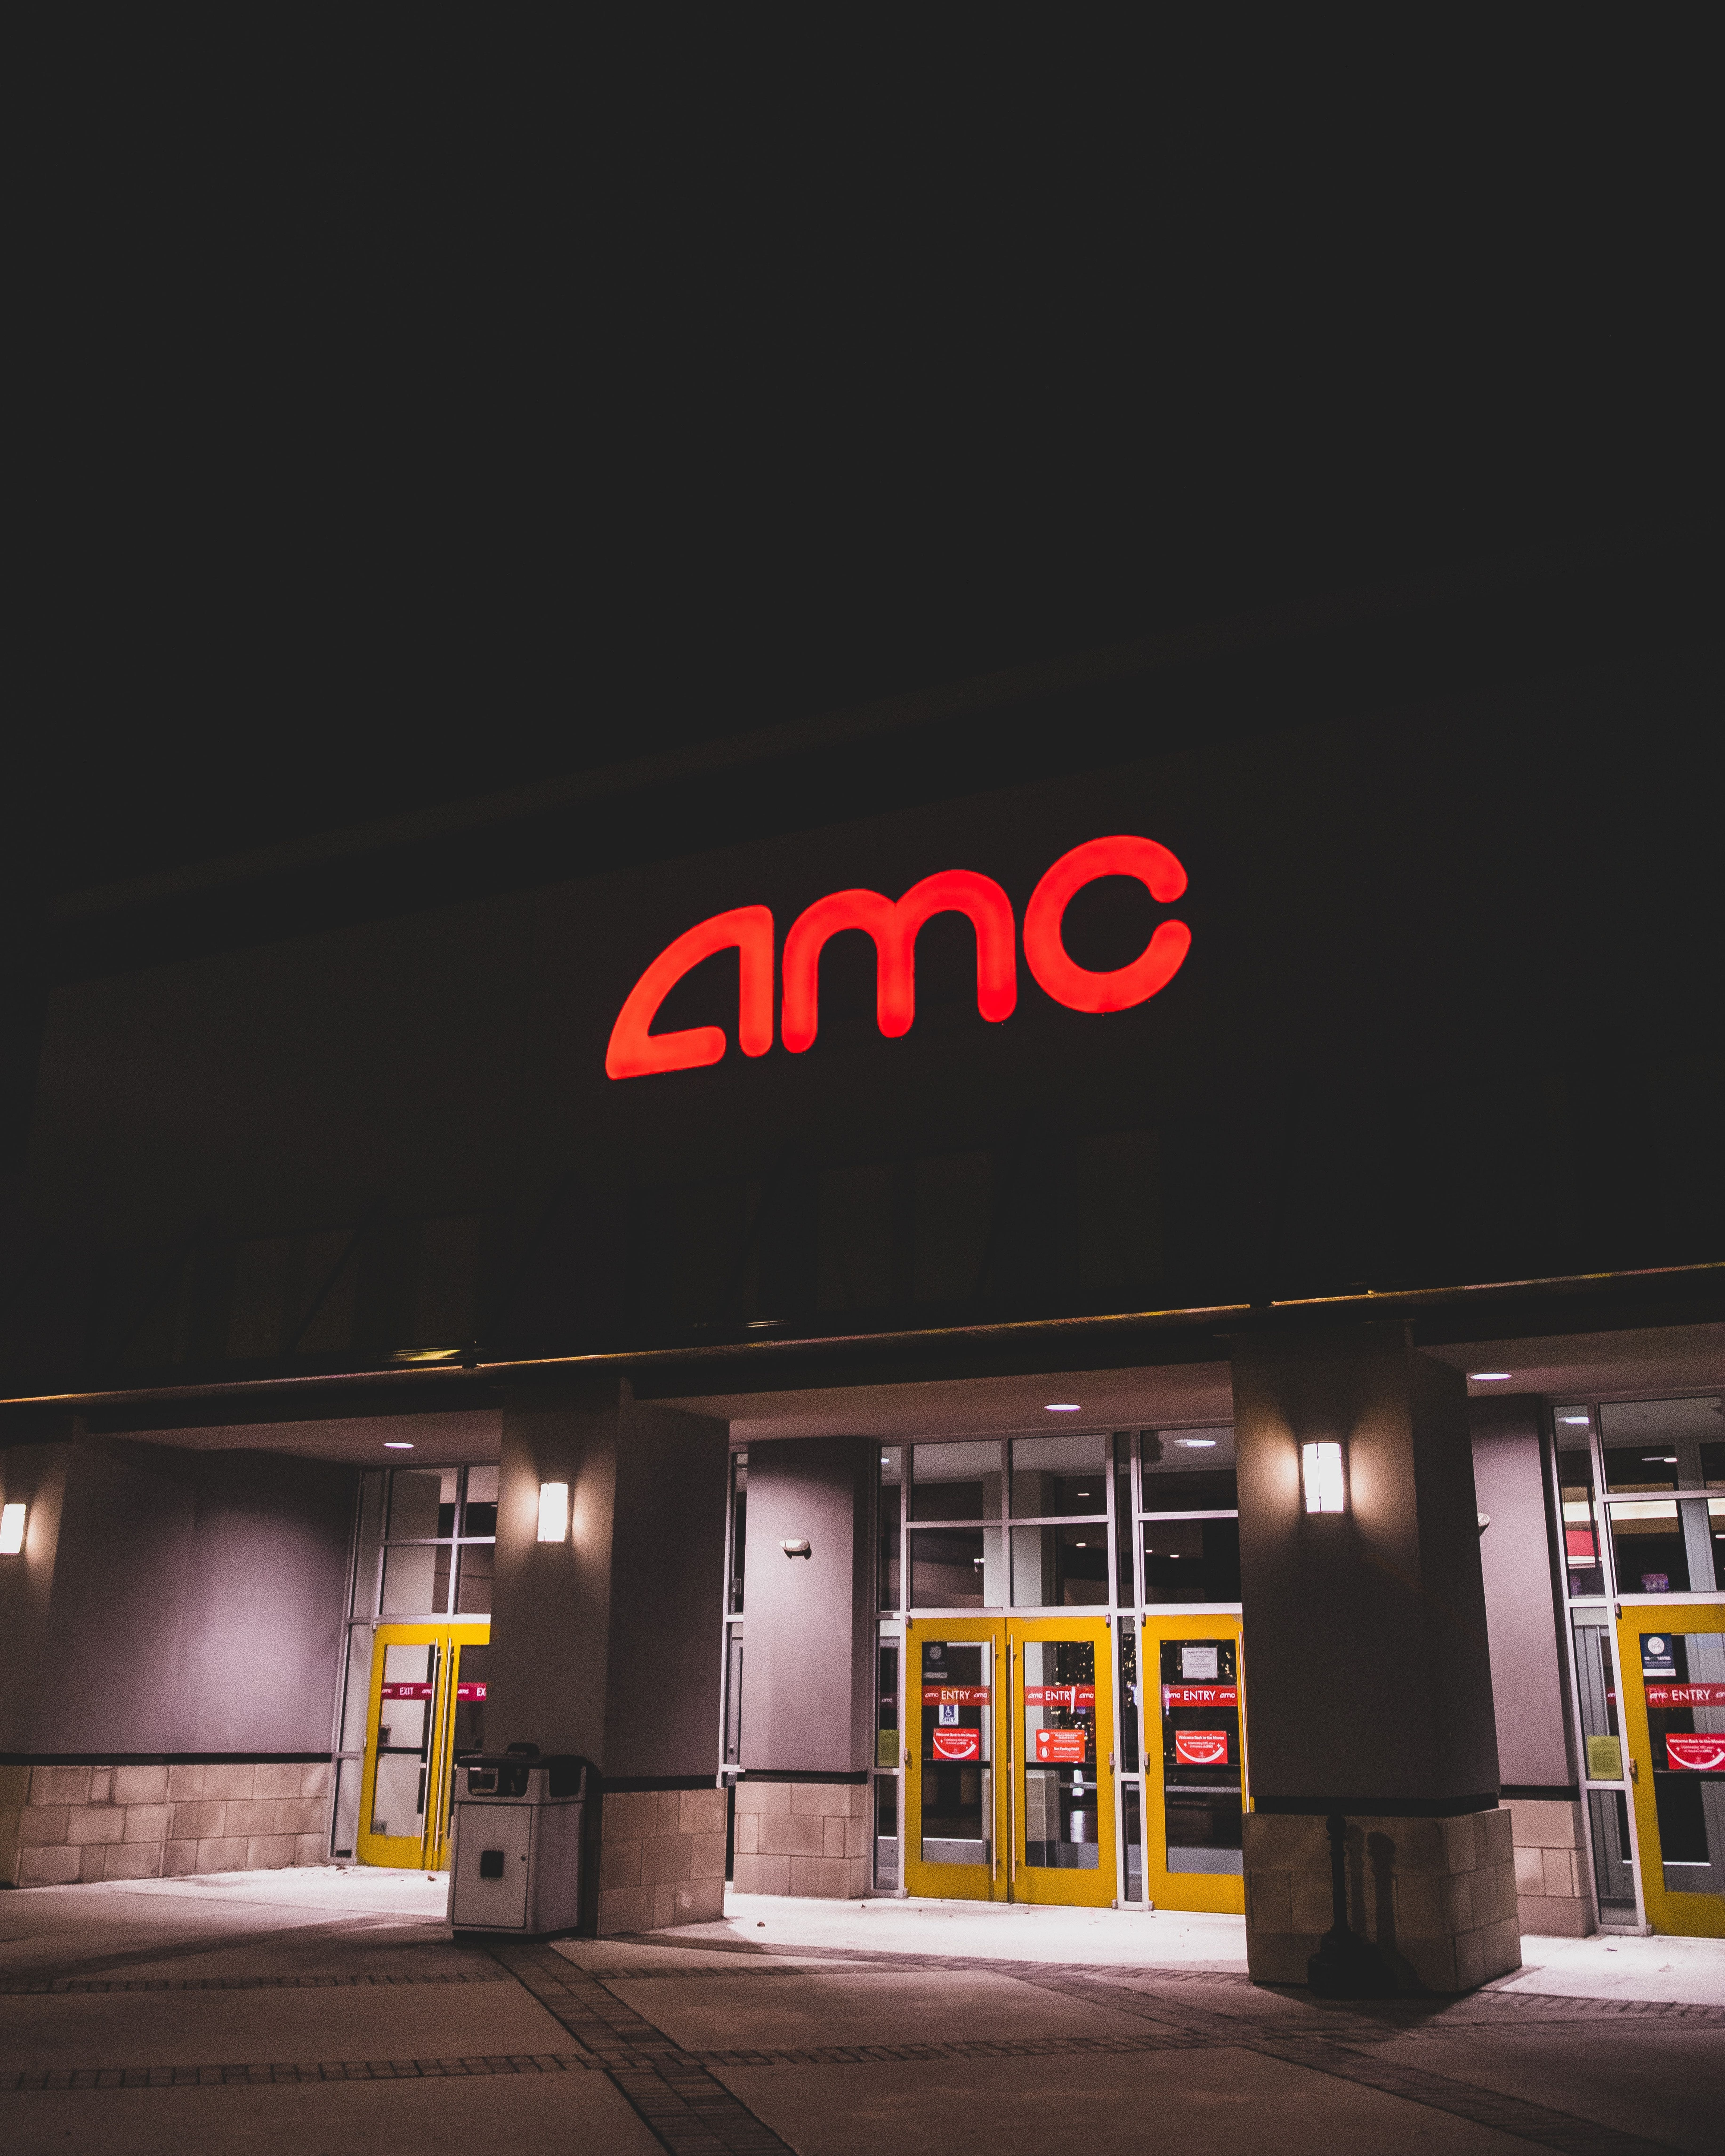 AMC To Accept Bitcoin And Crypto For Payment, Are NFT Commemorative Tickets Next?